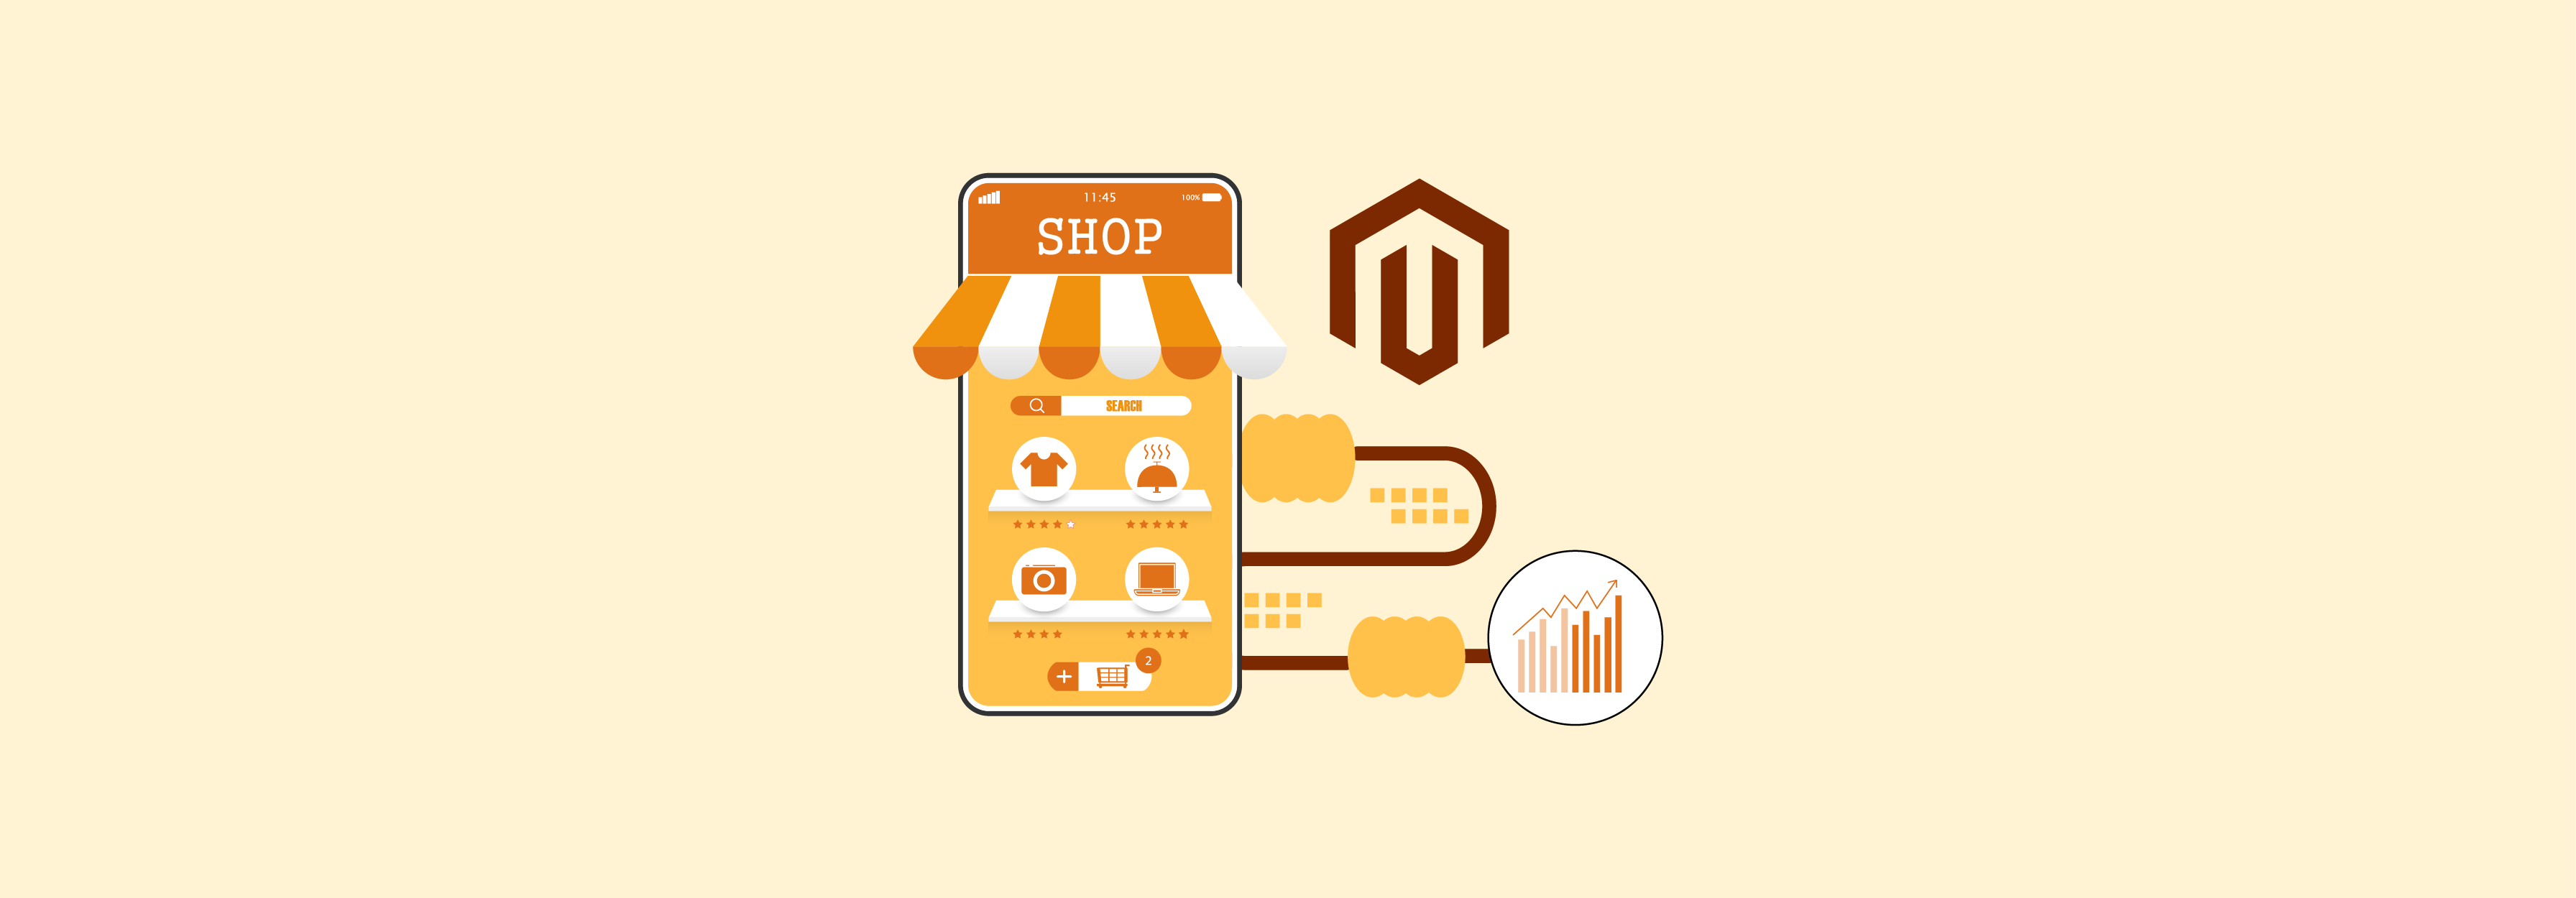 Affect of Bandwidth and Traffic on Magento Hosting Plans 